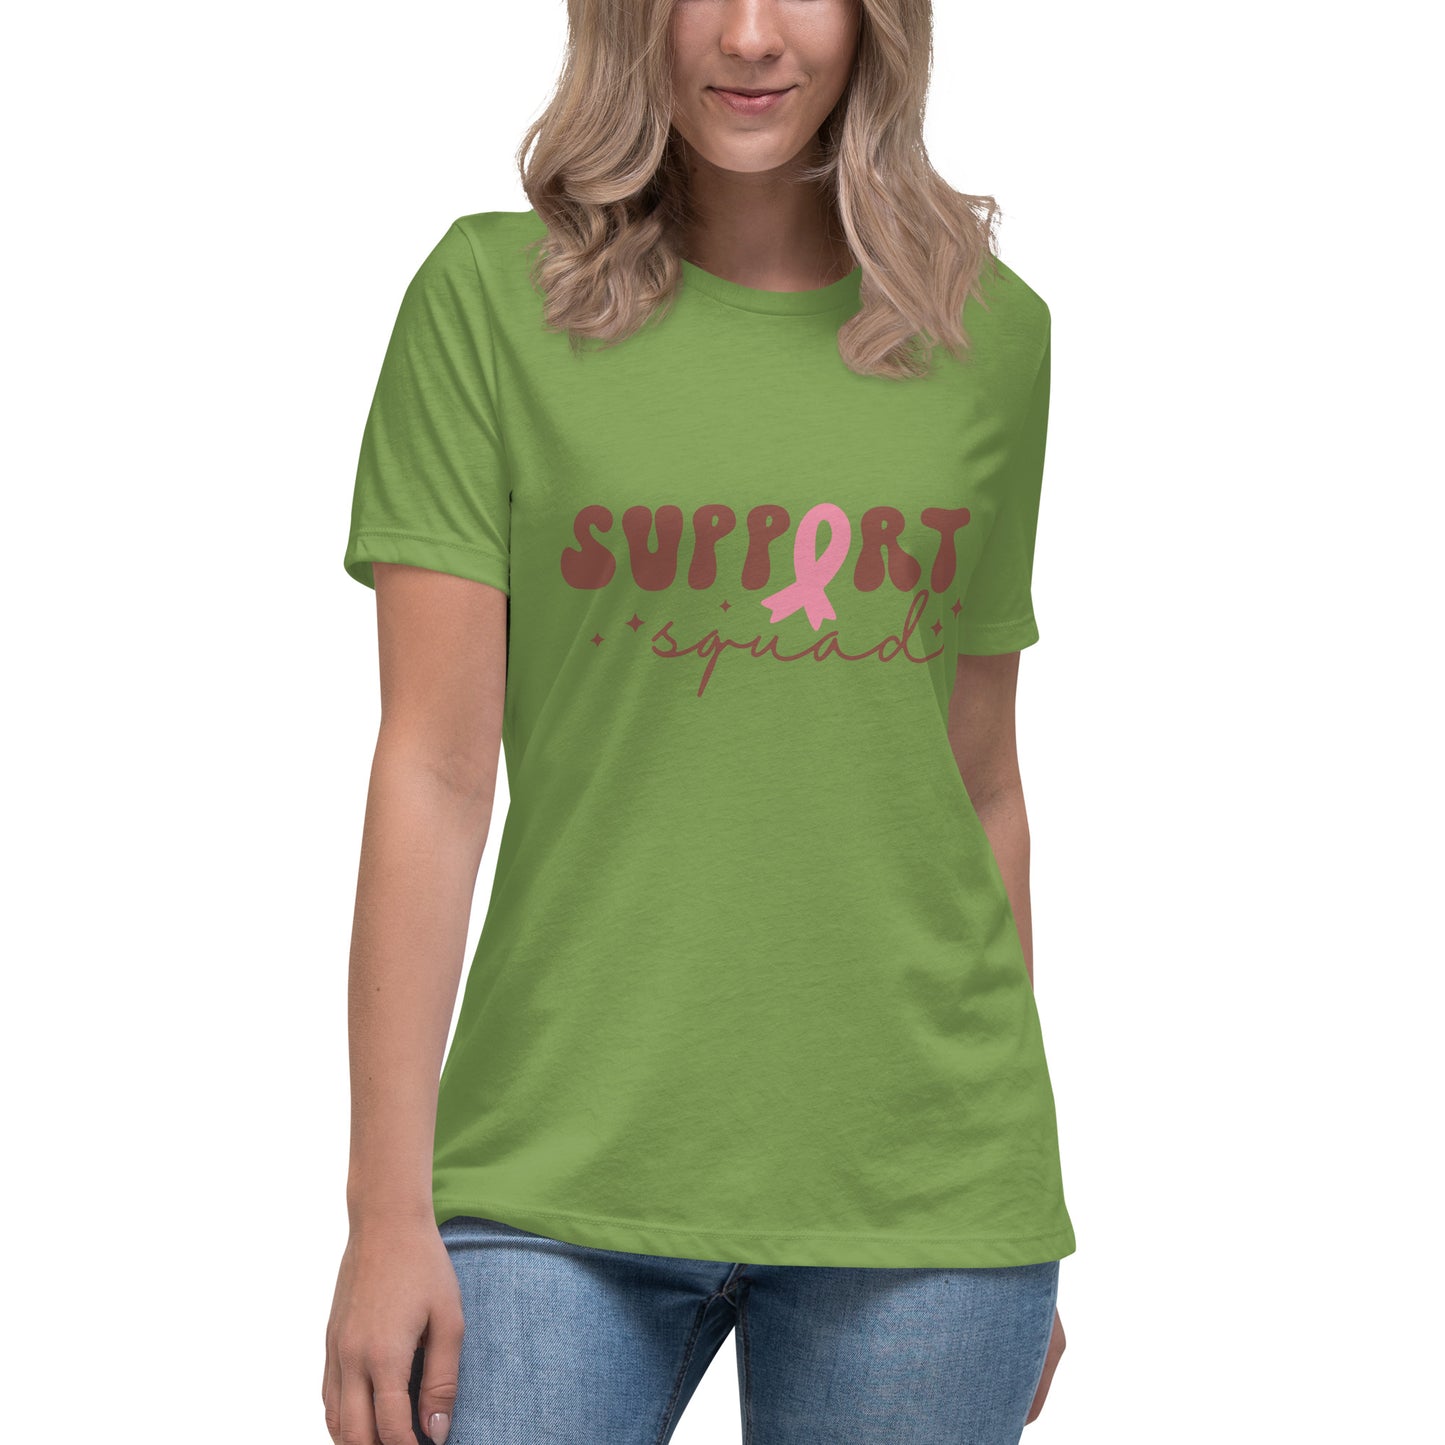 Support Squad Breast Cancer Awareness Women's Relaxed T-Shirt Tee Tshirt